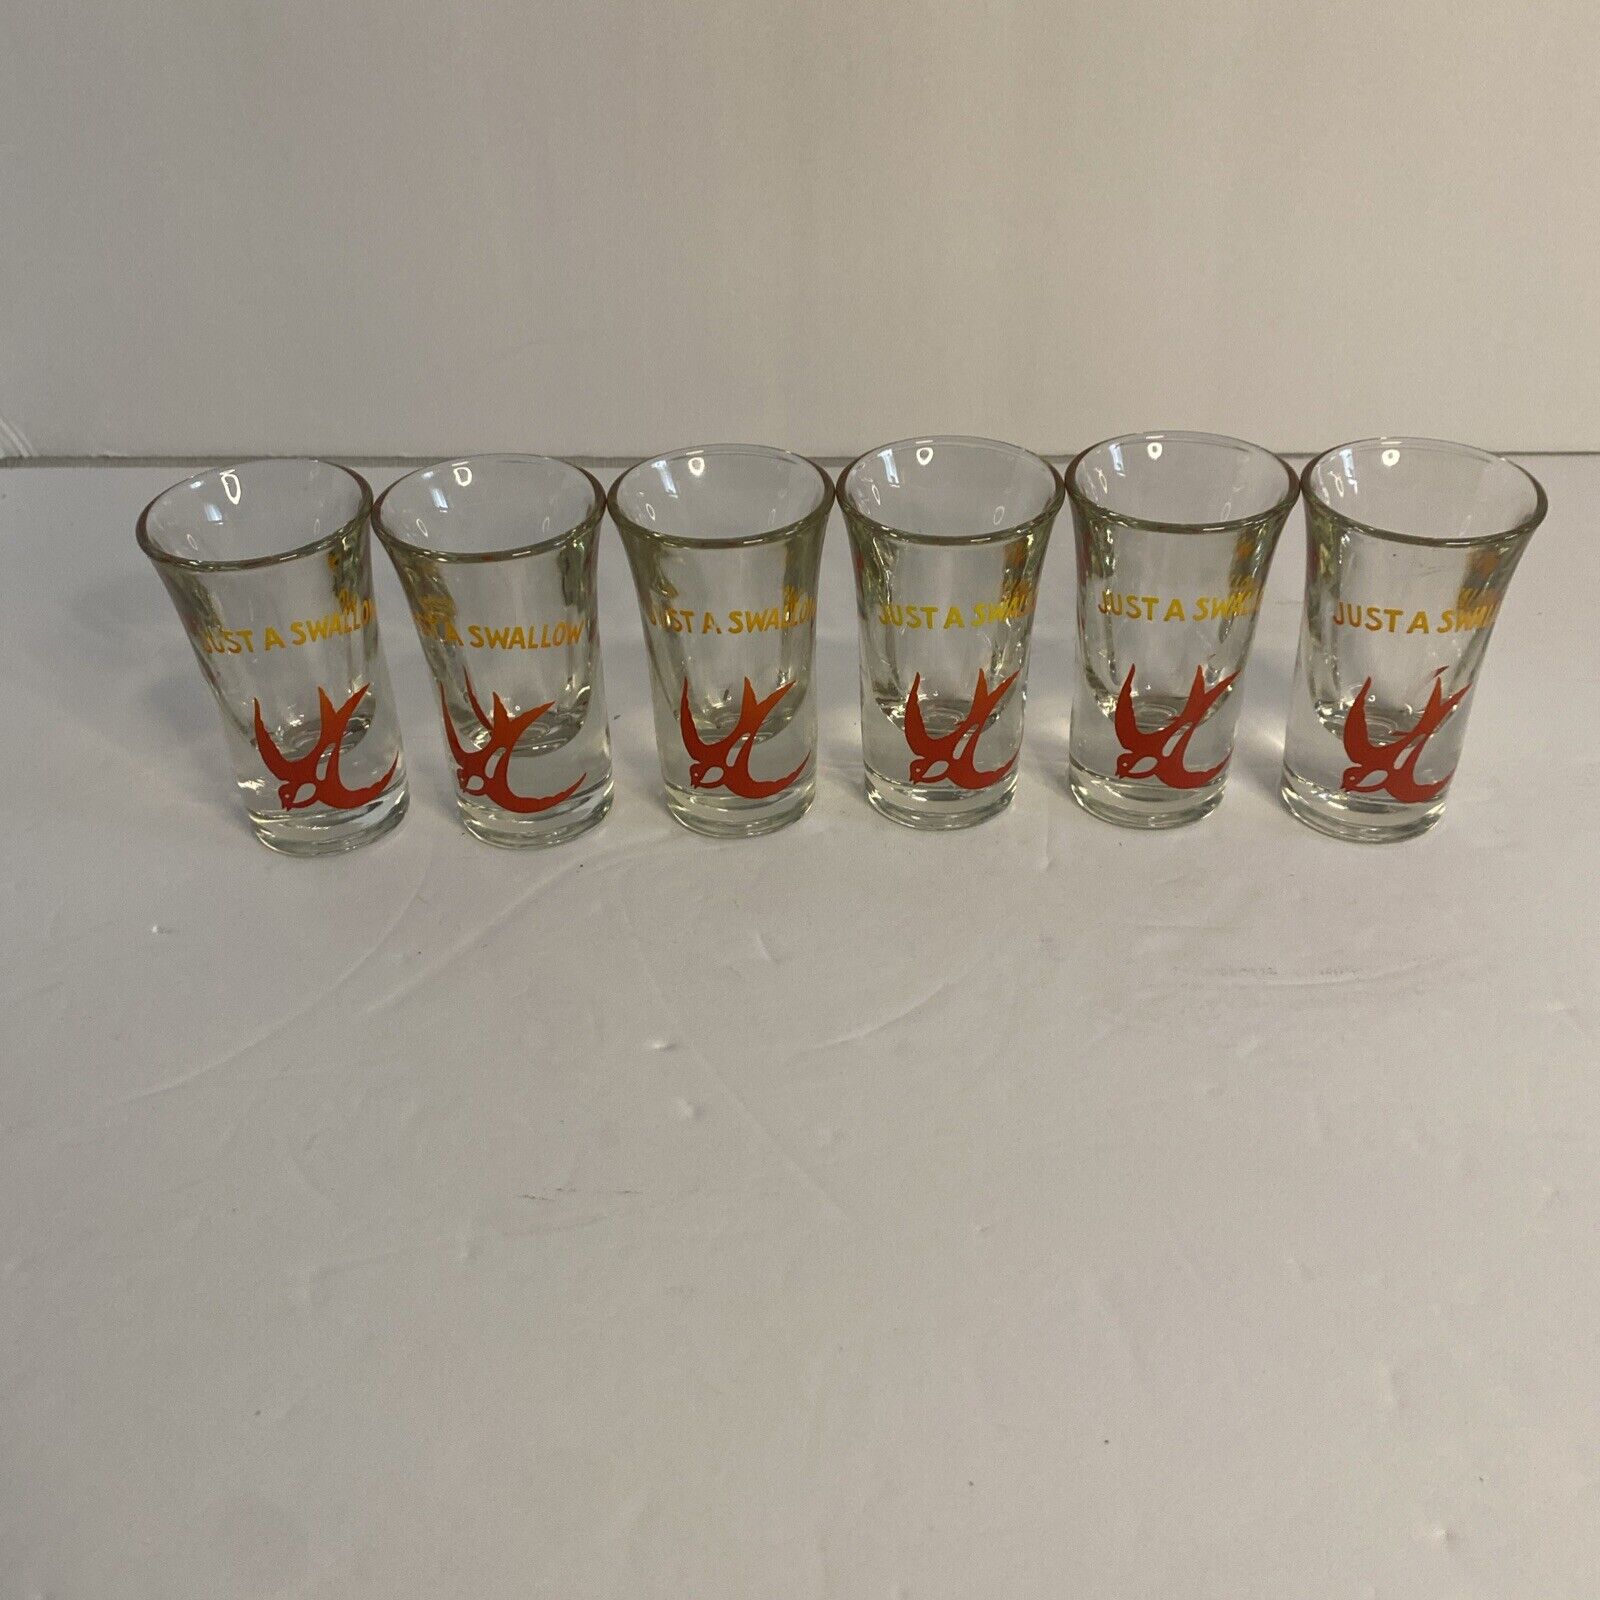 Vintage 50's Shot Glasses Just a Swallow Navy Tattoo Style Bird Barware Set Of 6